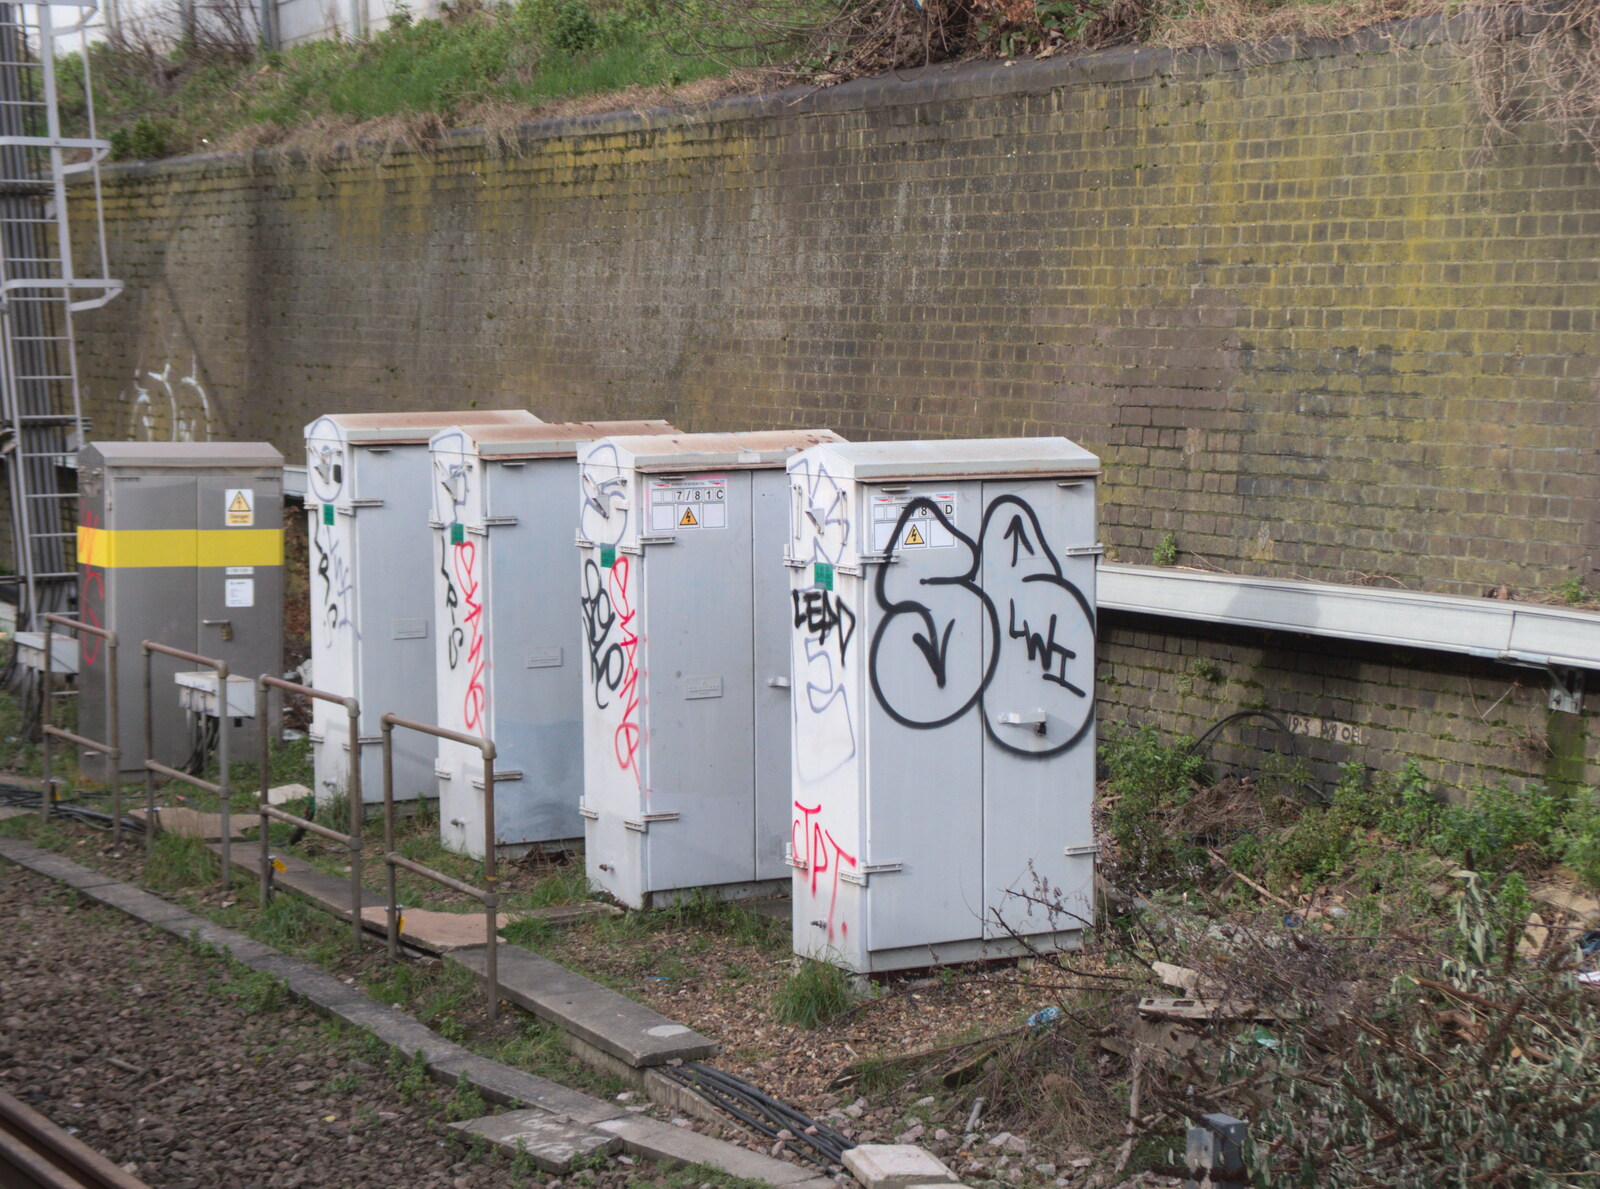 Tagged signalling boxes from Another Trip to Nandos, Bayswater, London - 26th February 2020